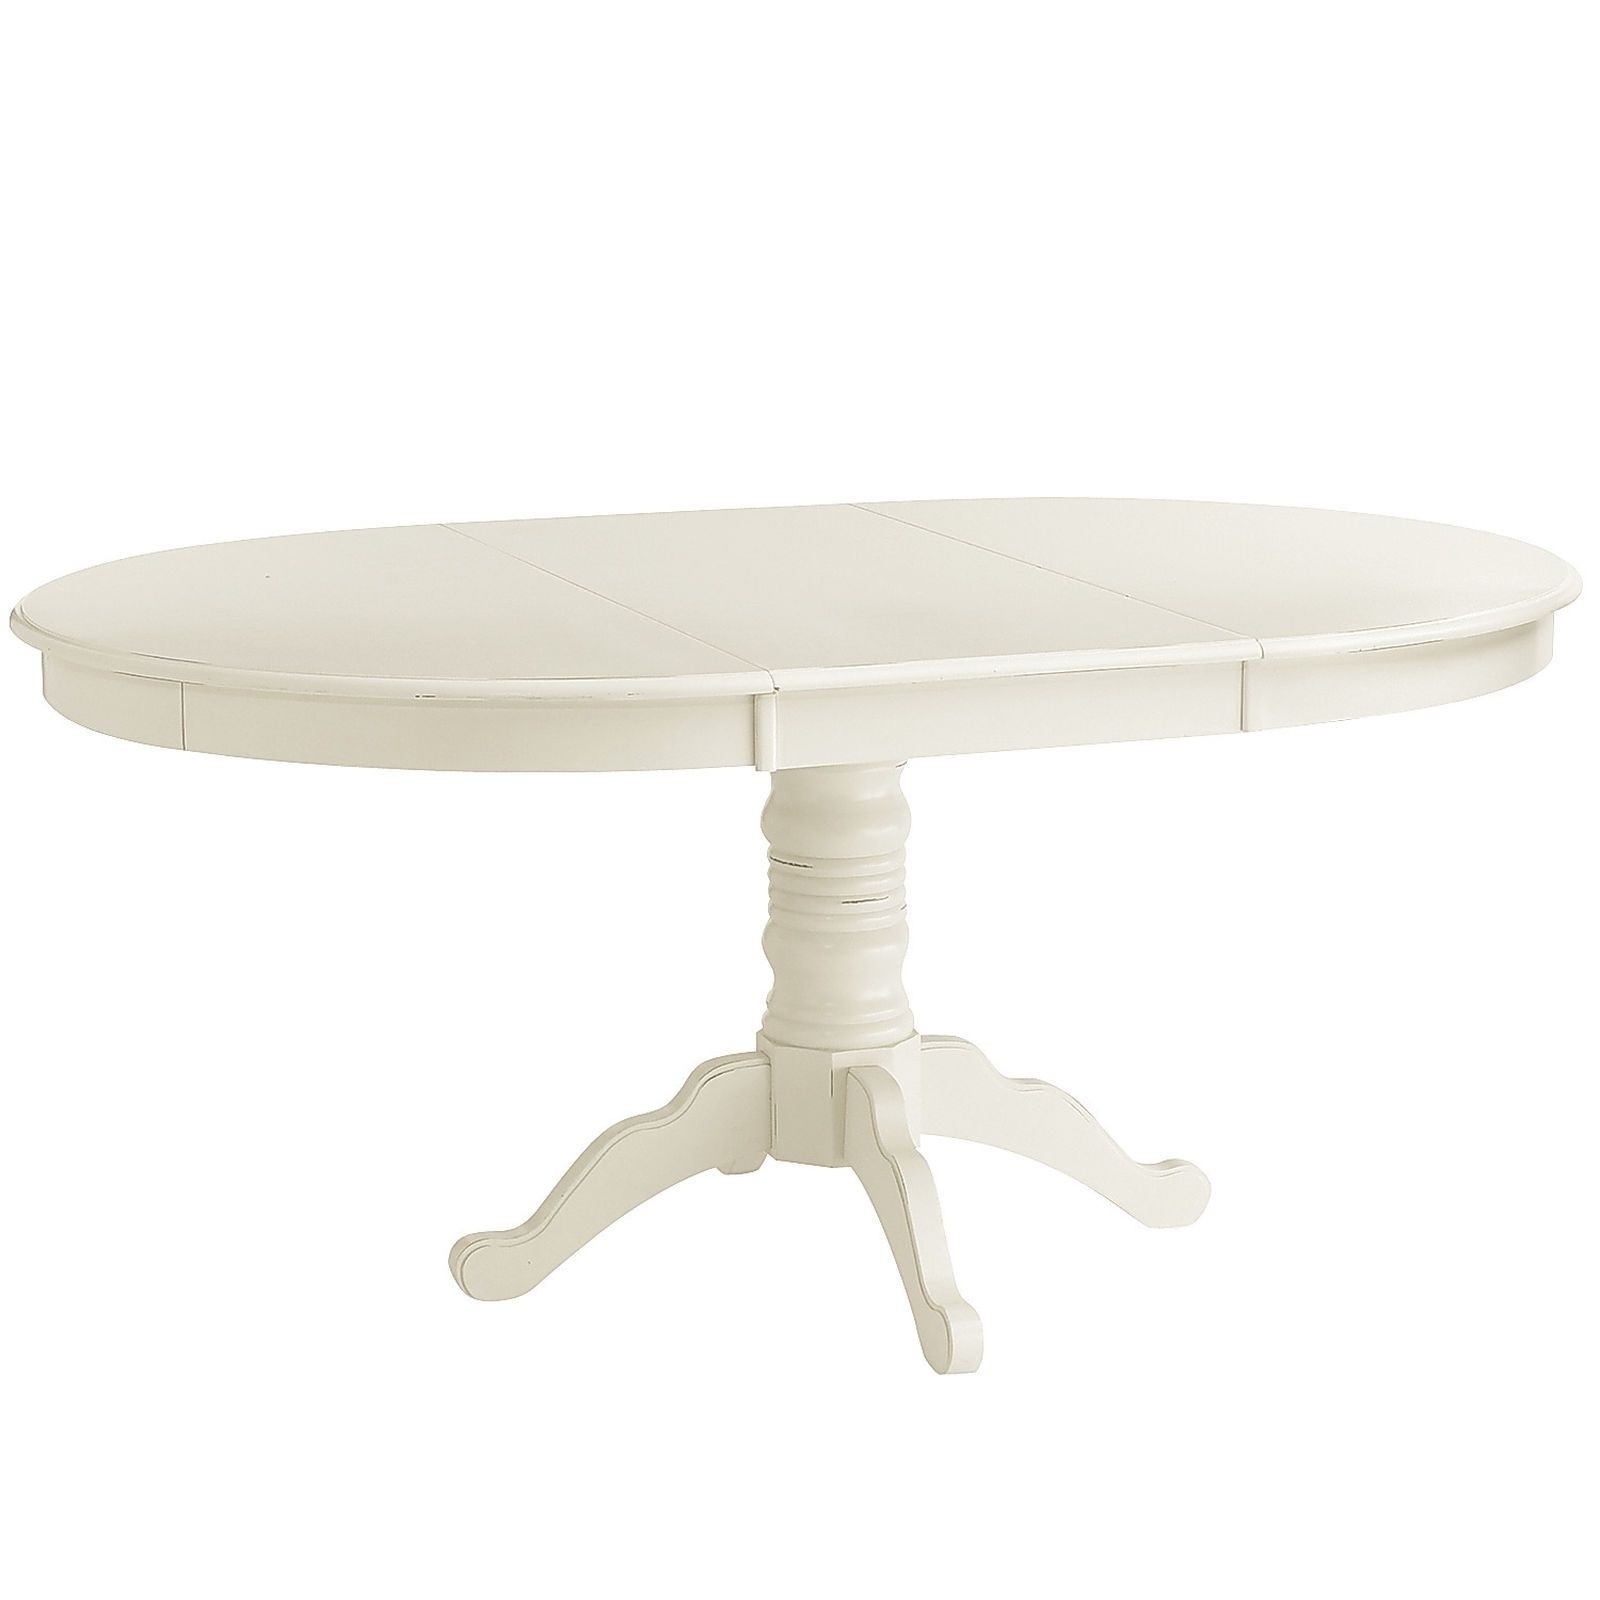 Round dining table with leaves